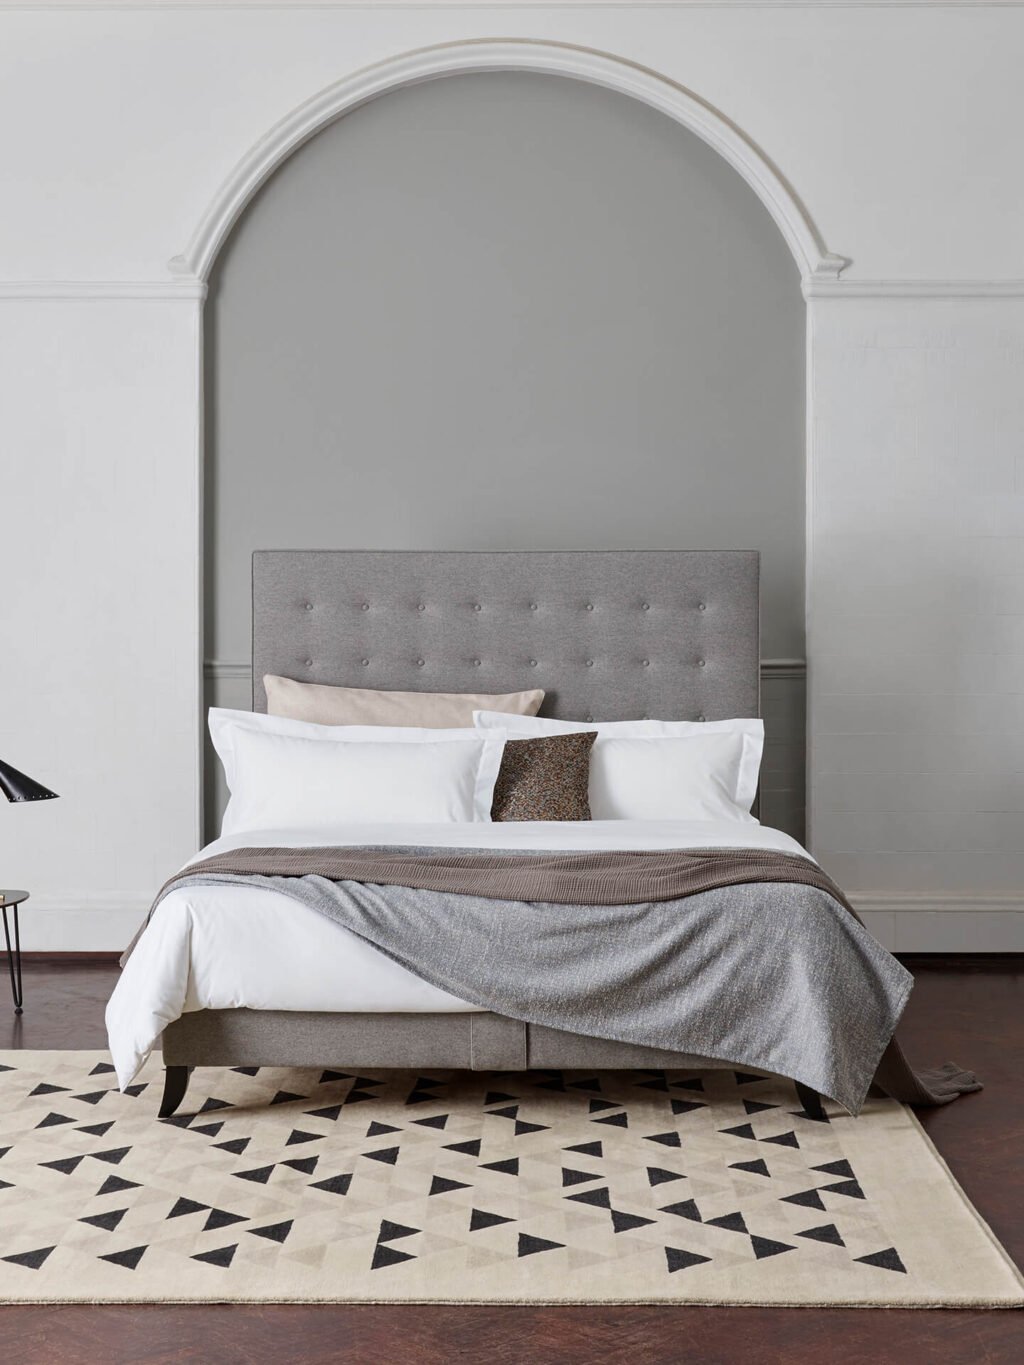 The drift percale bed linen